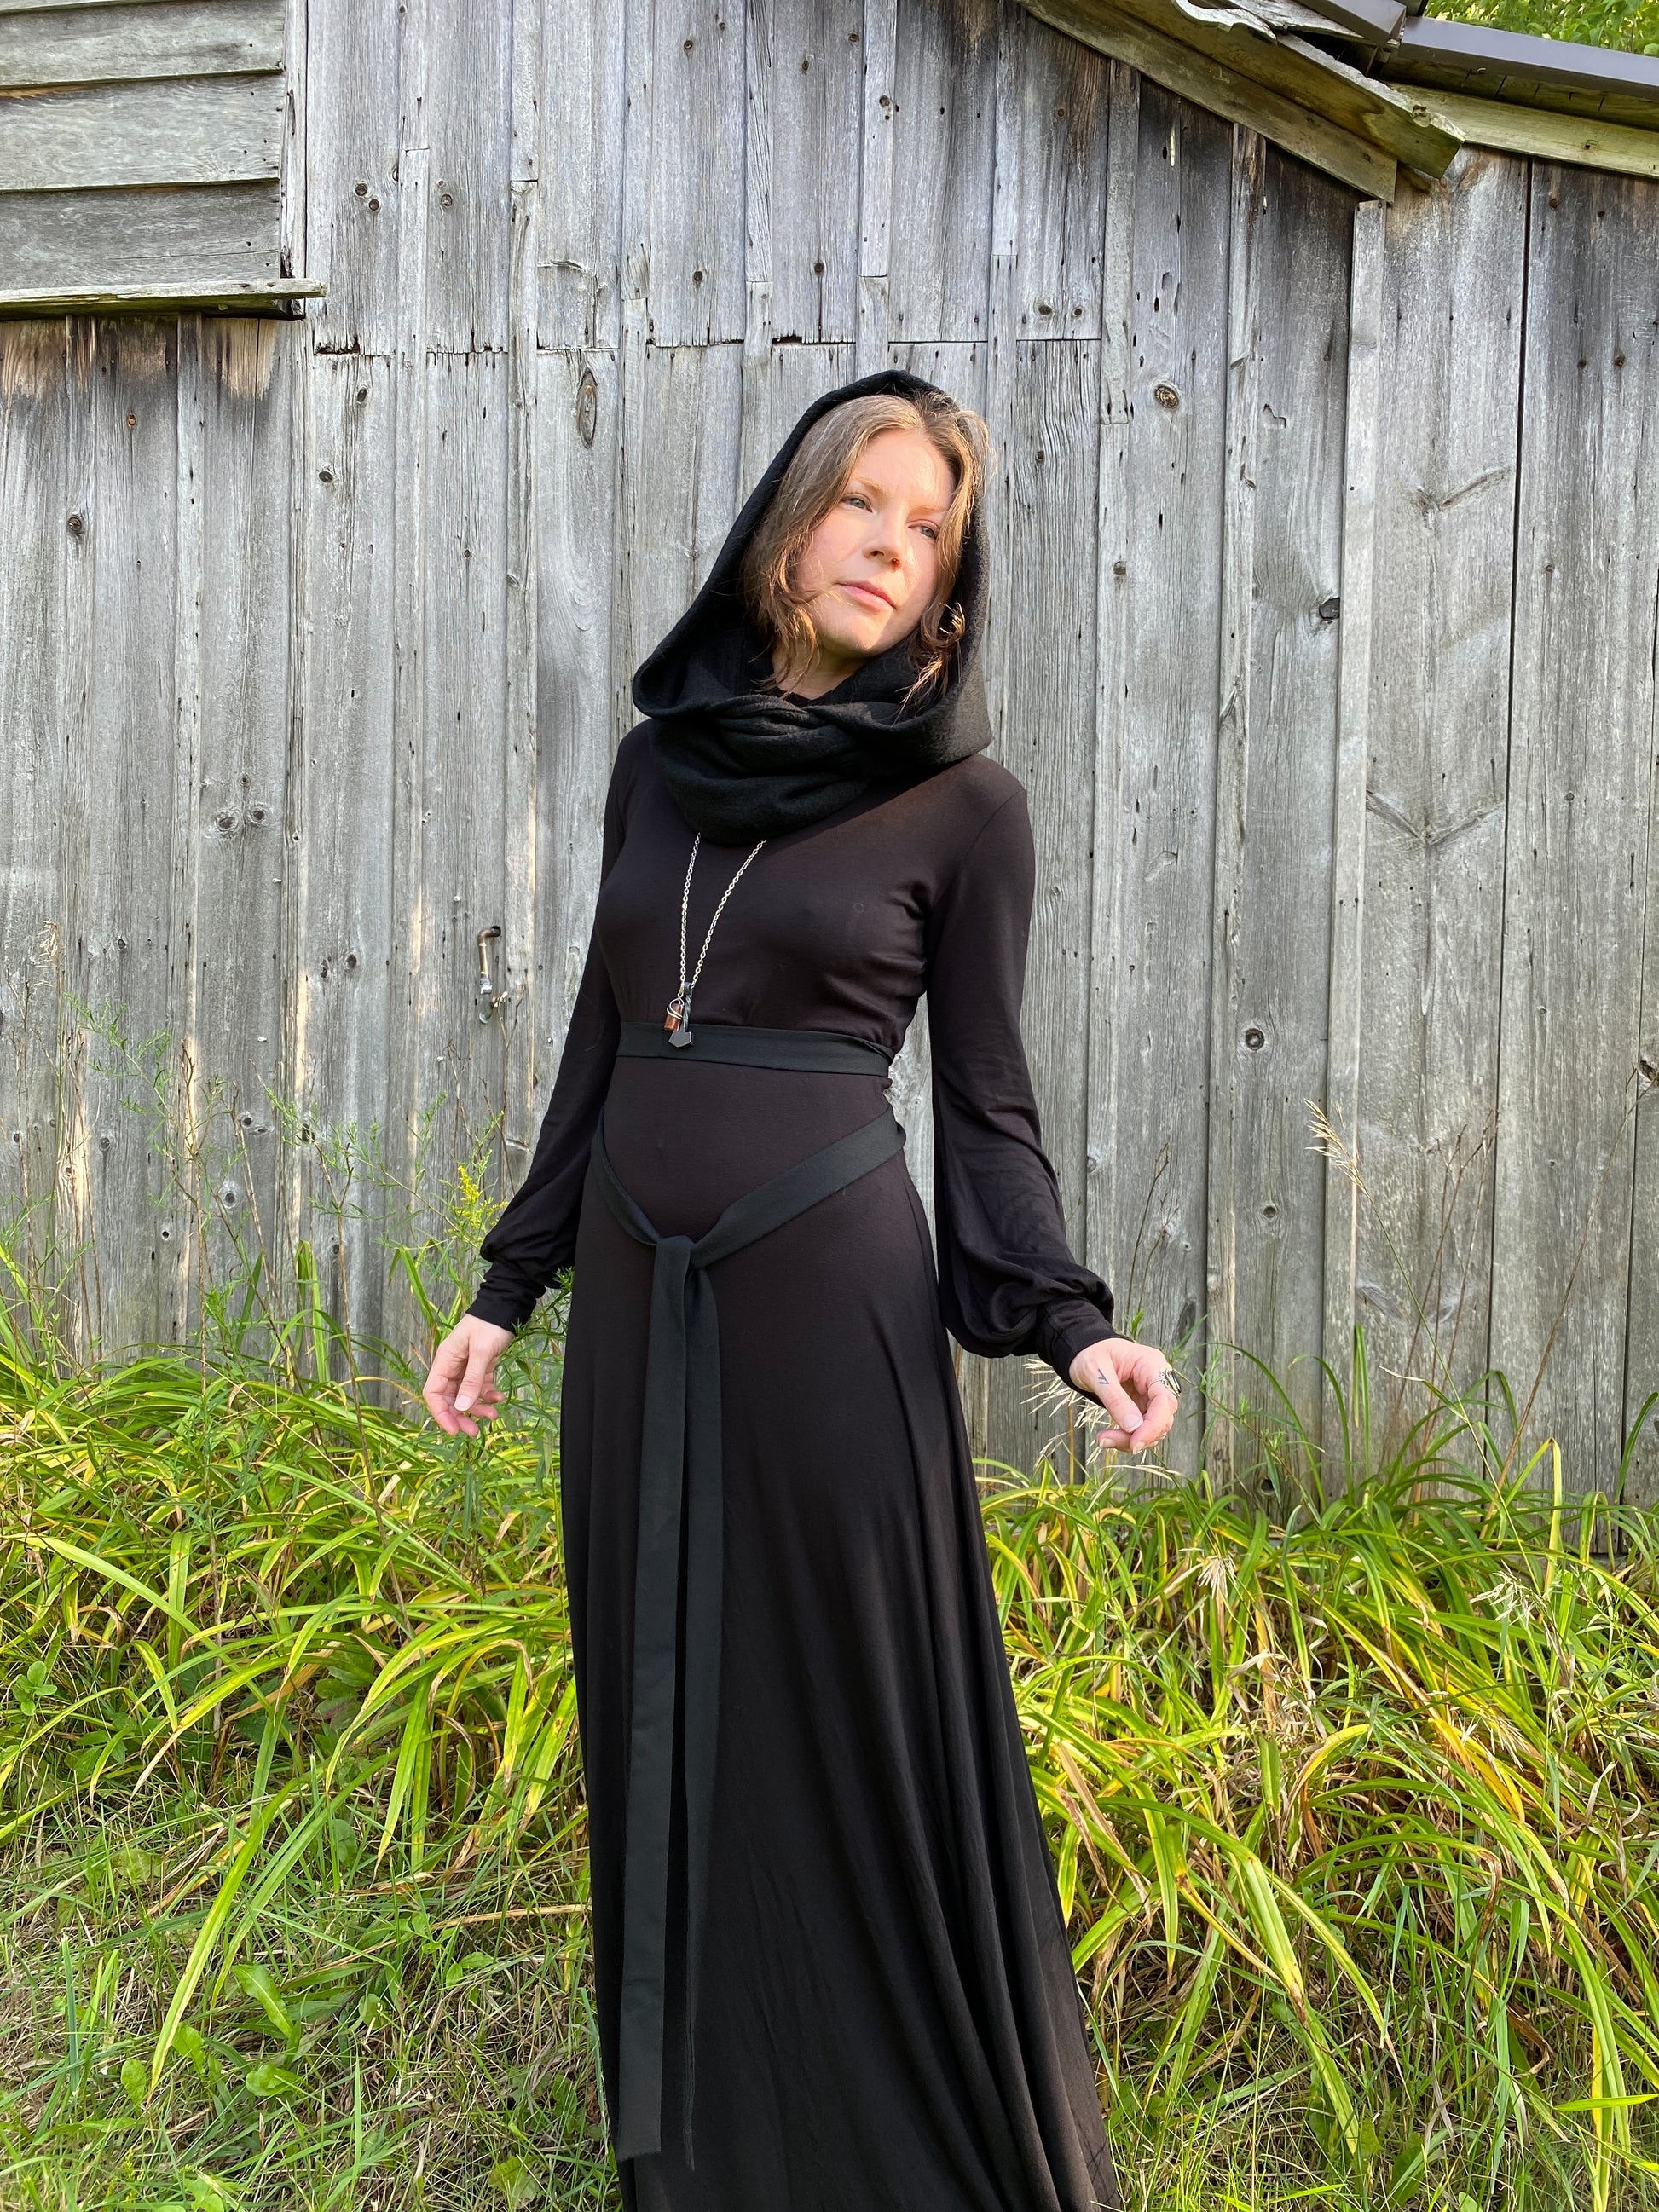 A woman with red hair in a black dress. Standing infront of a pionner, wood building with tall green across along the ground. She is showcasing a black wool cowl and hood that is being worn wrapped around the neck with the hood up.